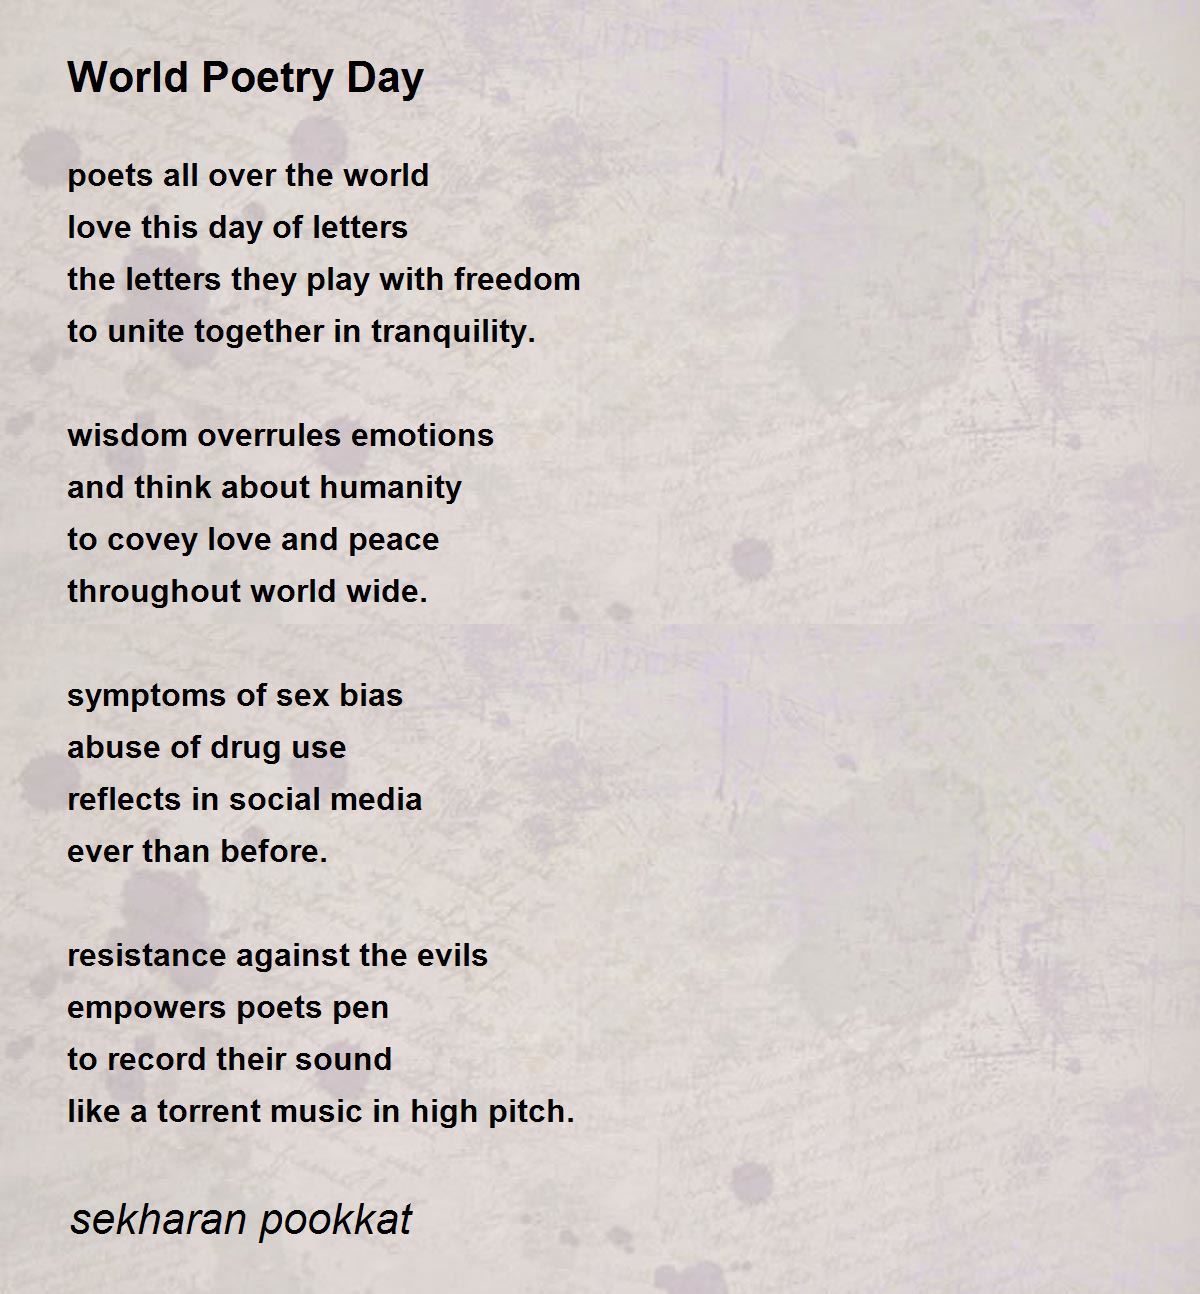 World Poetry Day - World Poetry Day Poem by sekharan pookkat